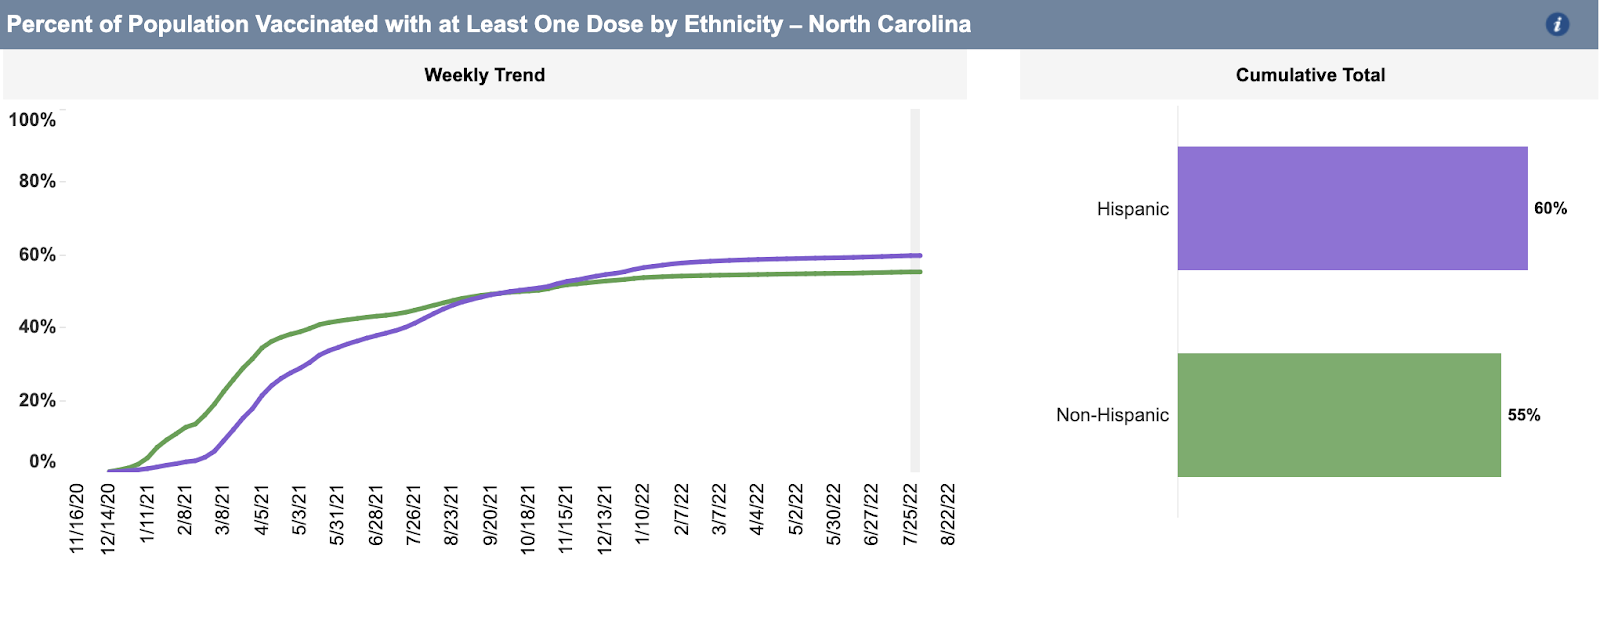 Chart showing the percent of North Carolina's population vaccinated with at least one dose by ethnicity.  Though disparities emerged early, the state has reached vaccine equity as vaccination rates are now higher for the state's Hispanic populations than non-Hispanic populations. 